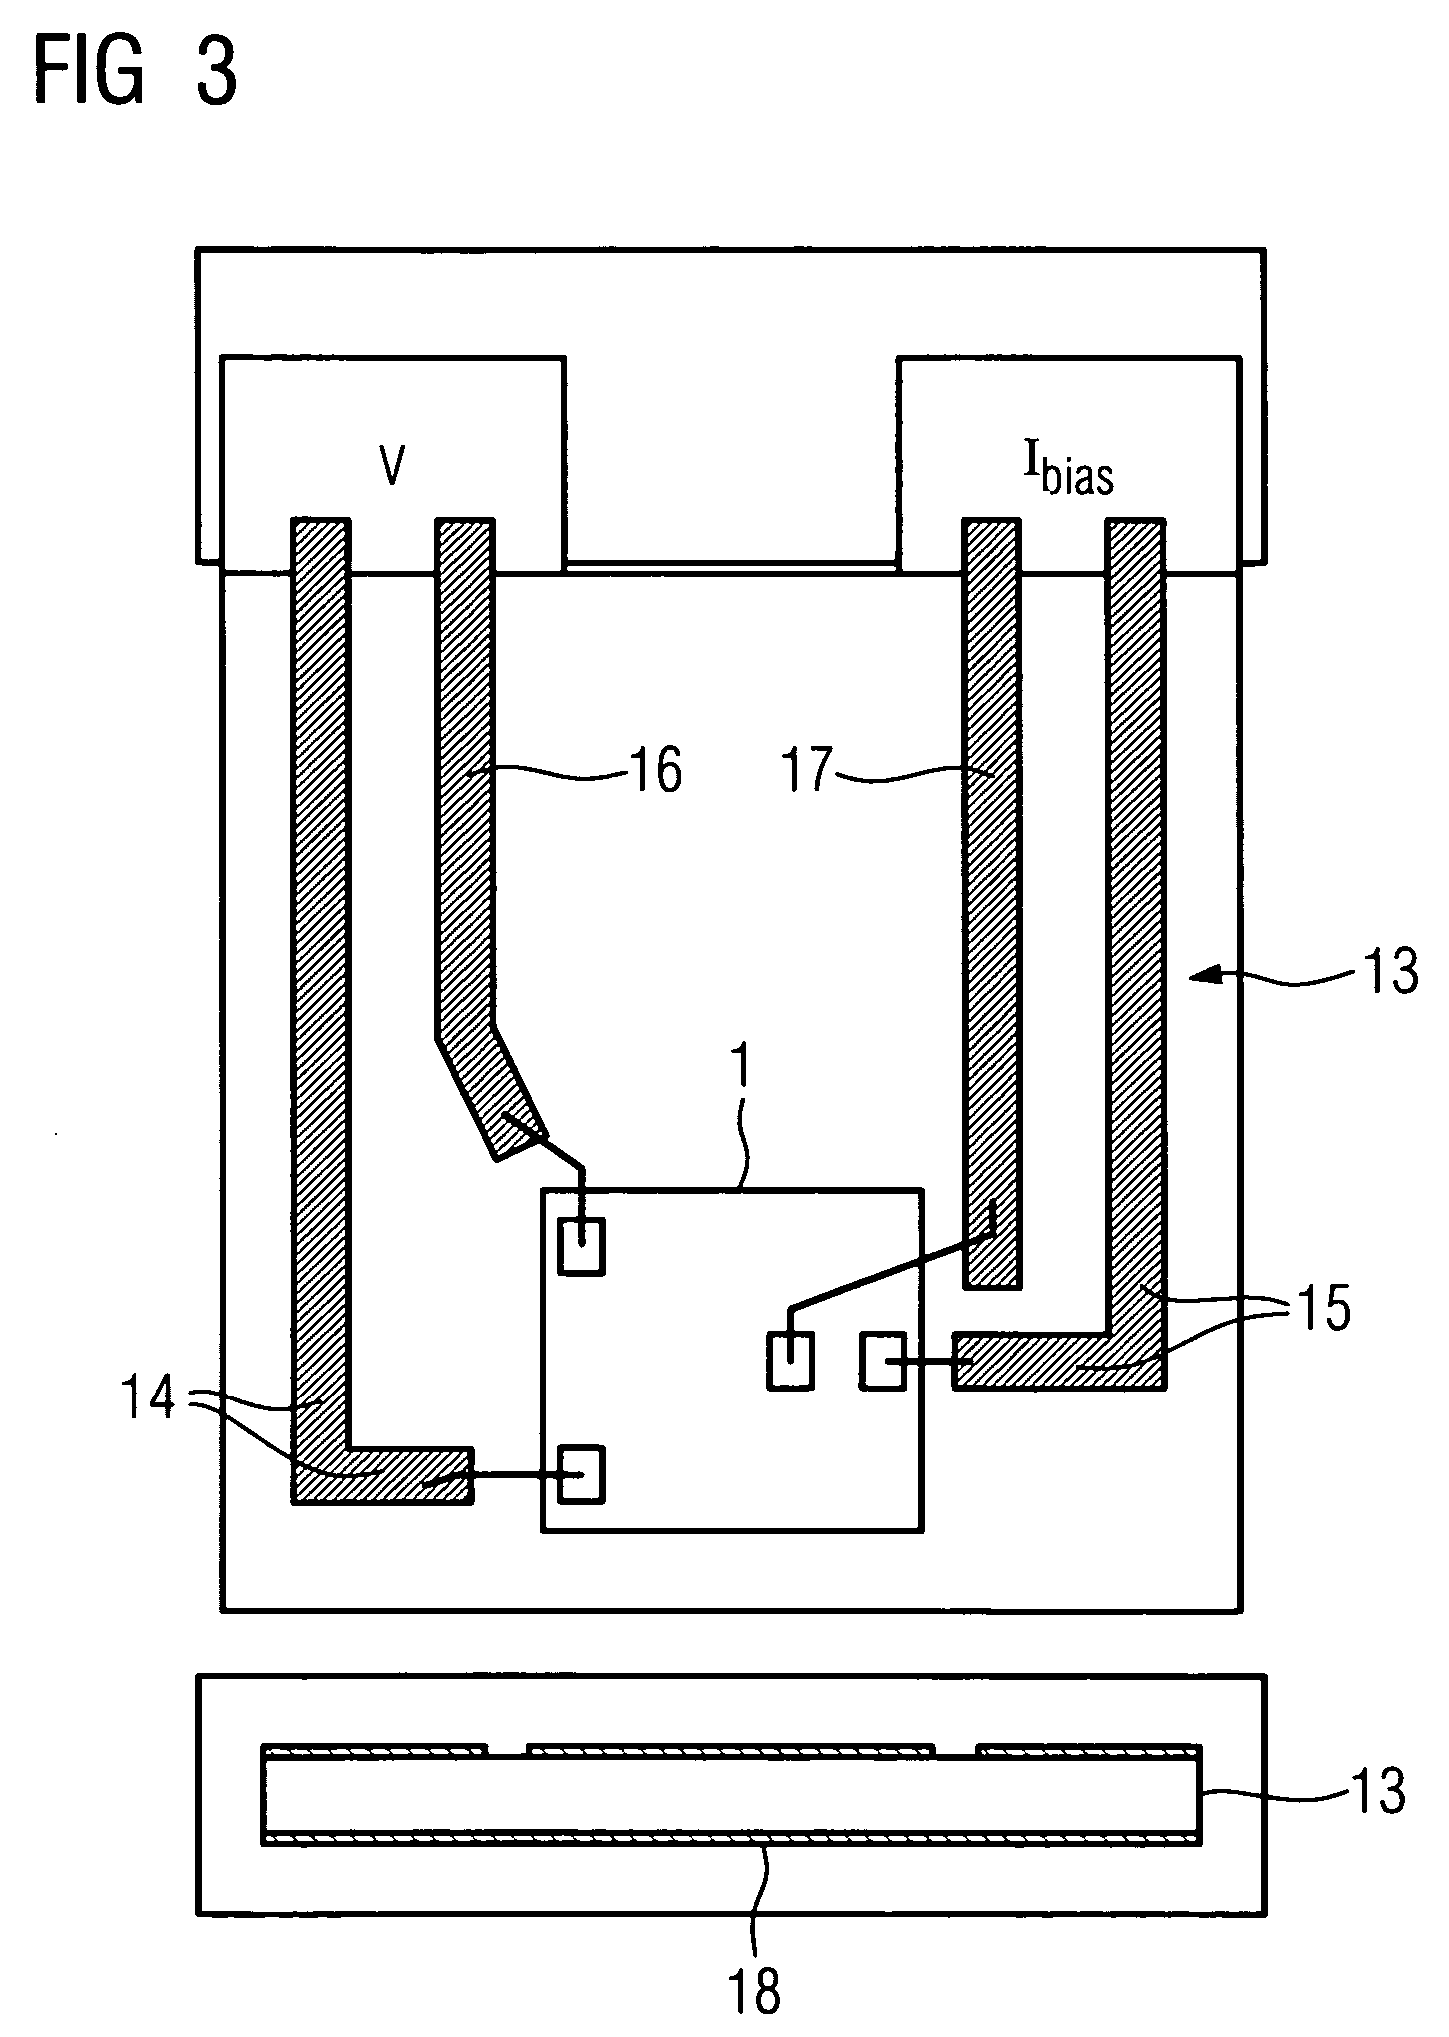 Device for detecting defects in electrically conductive materials in a nondestructive manner